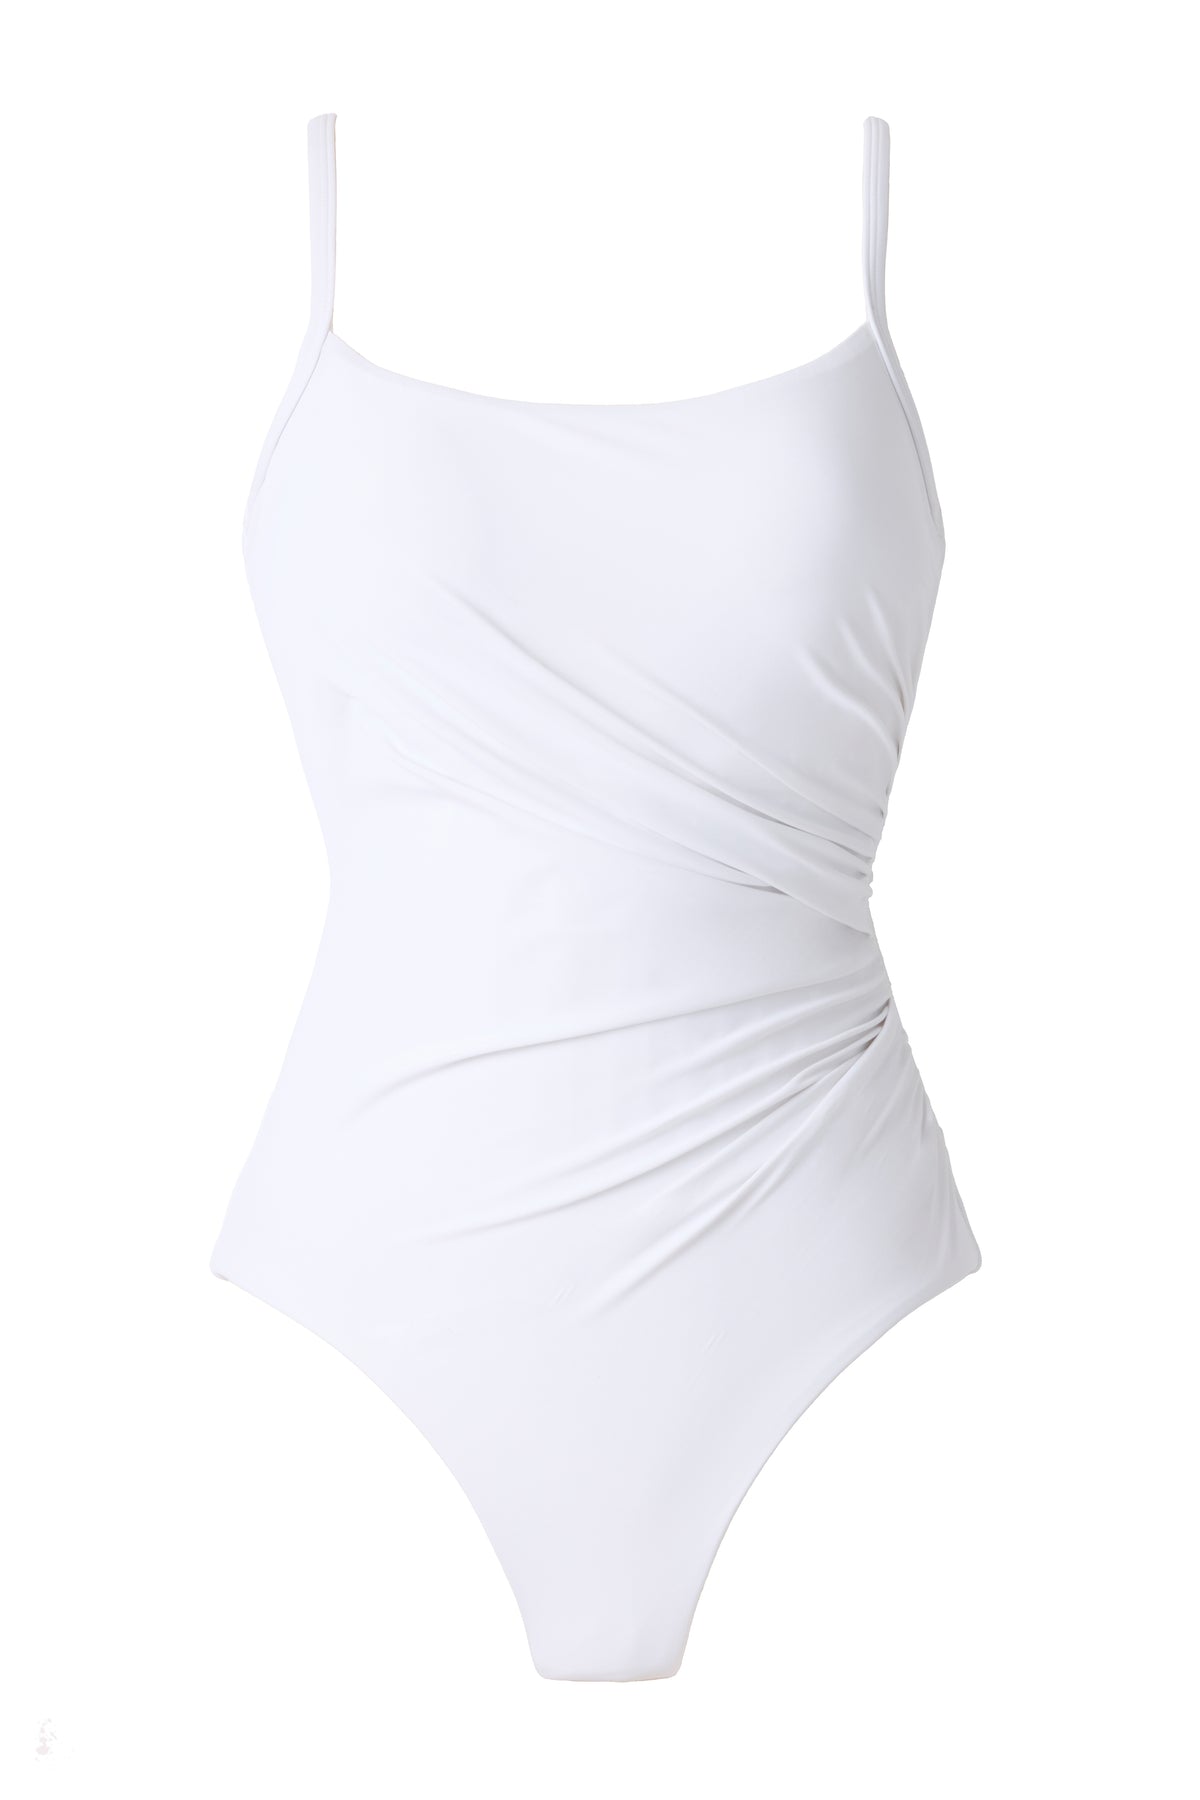 Rocksolid Starr White Swimsuit